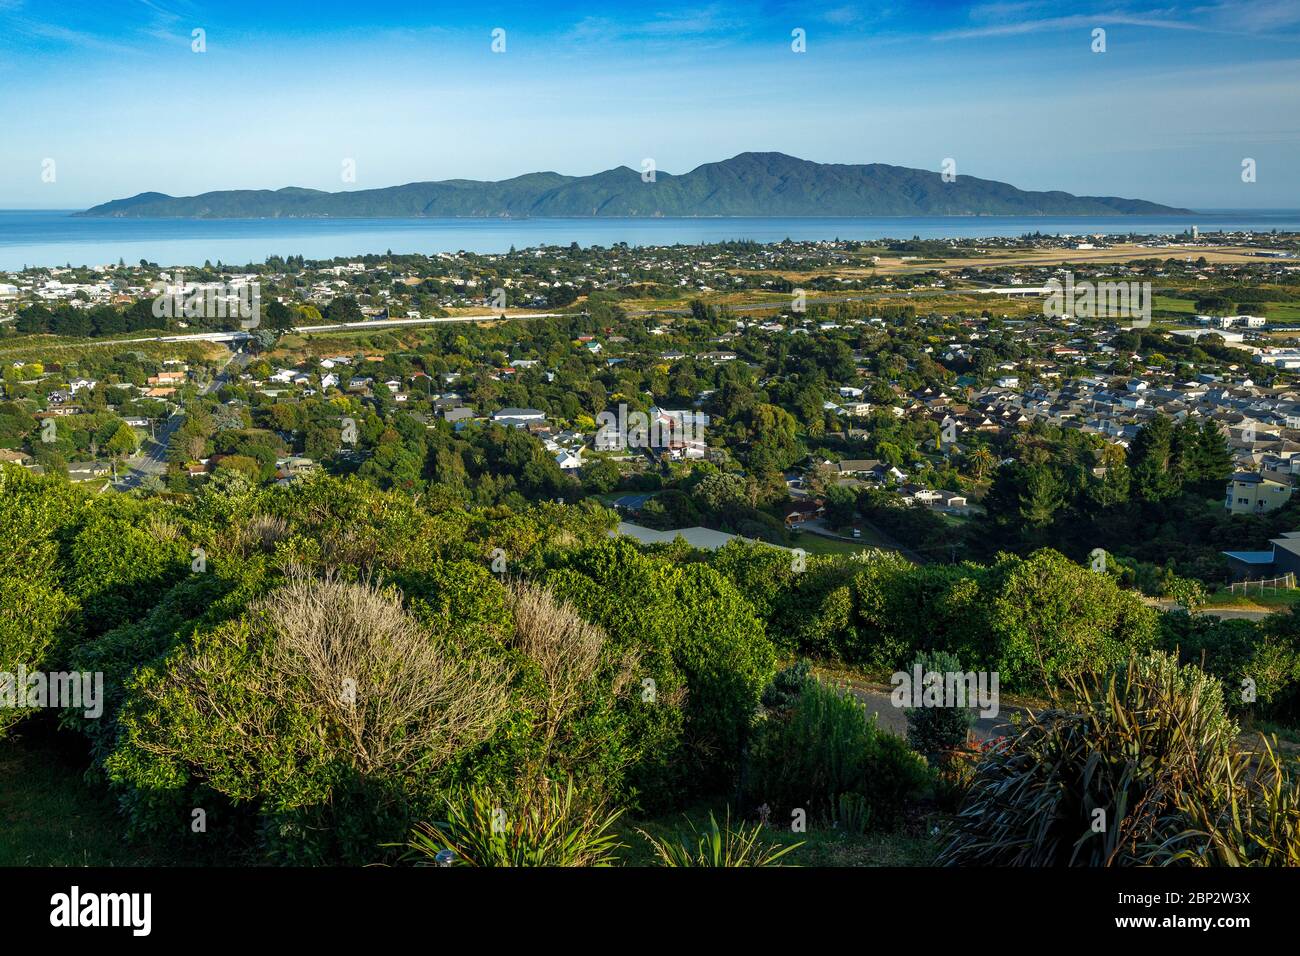 The view over Paraparaumu towards Kapiti Island, New Zealand. Strewn with driftwood. The island is a carefully managed bird and wildlife sanctuary. Stock Photo